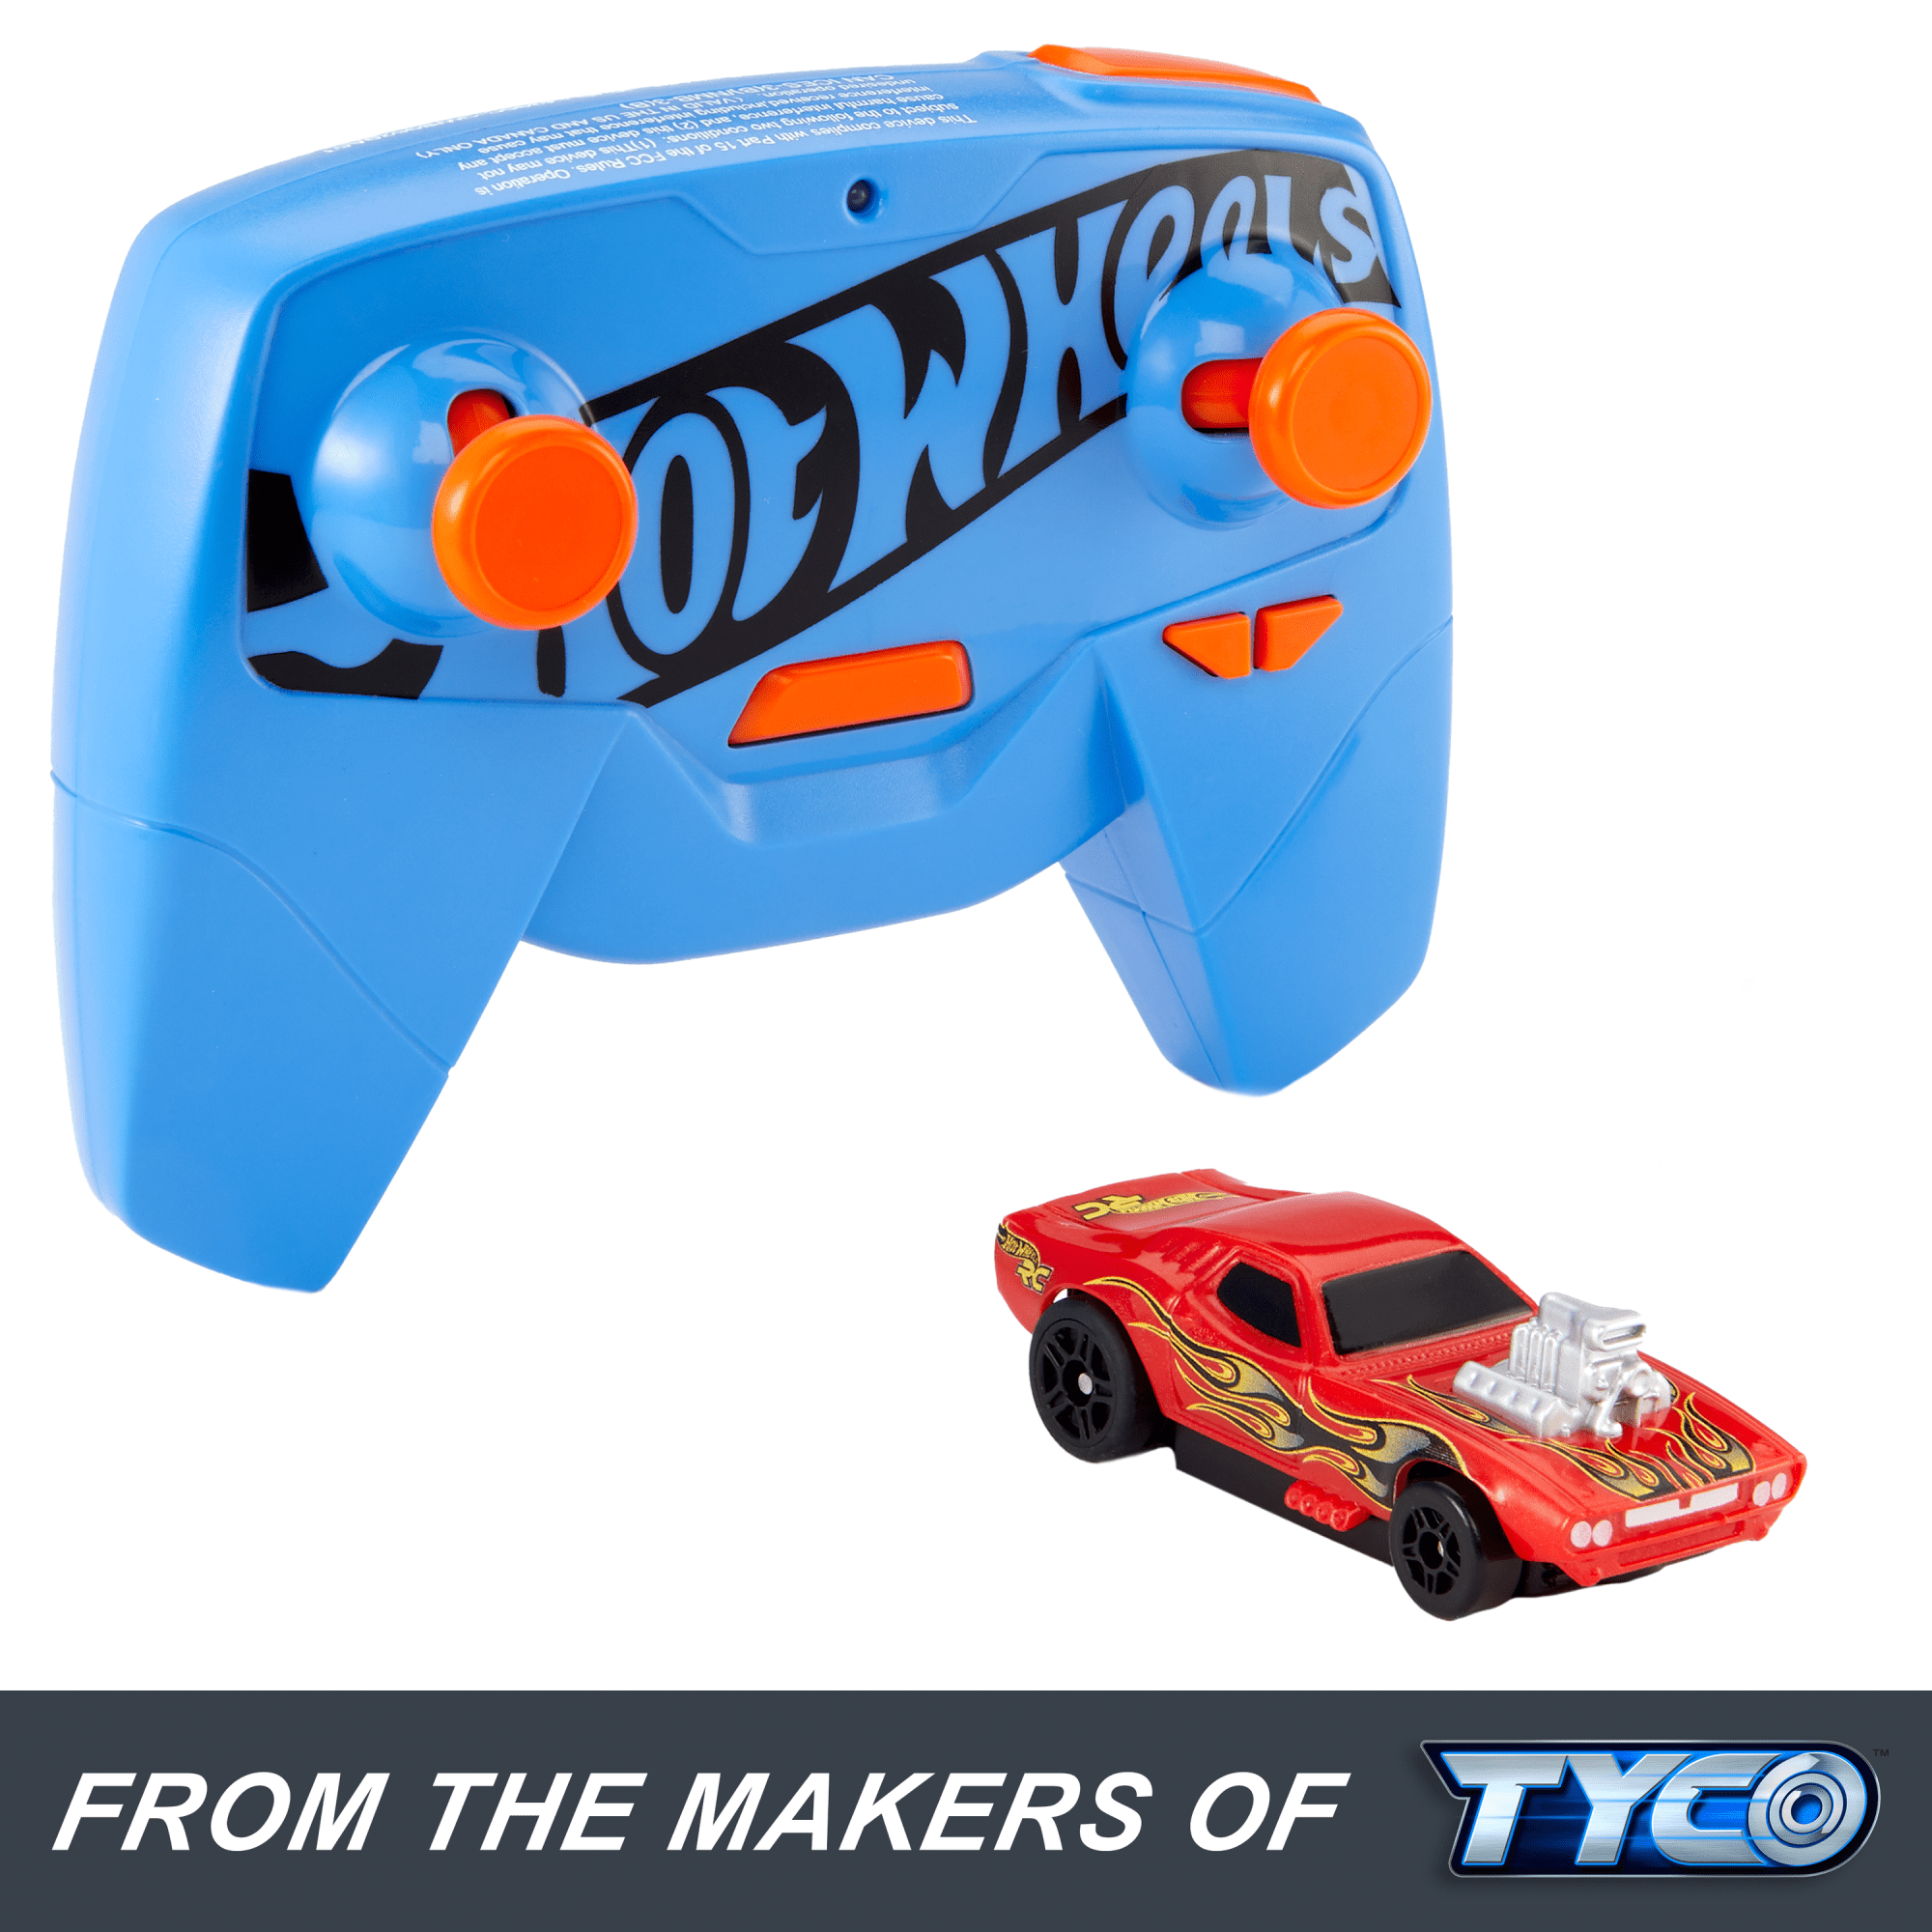  Hot Wheels Set of 2 Color Reveal Cars or Trucks in 1:64 Scale,  Surprise Reveal & Repeat Color Change (Styles May Vary) : Toys & Games